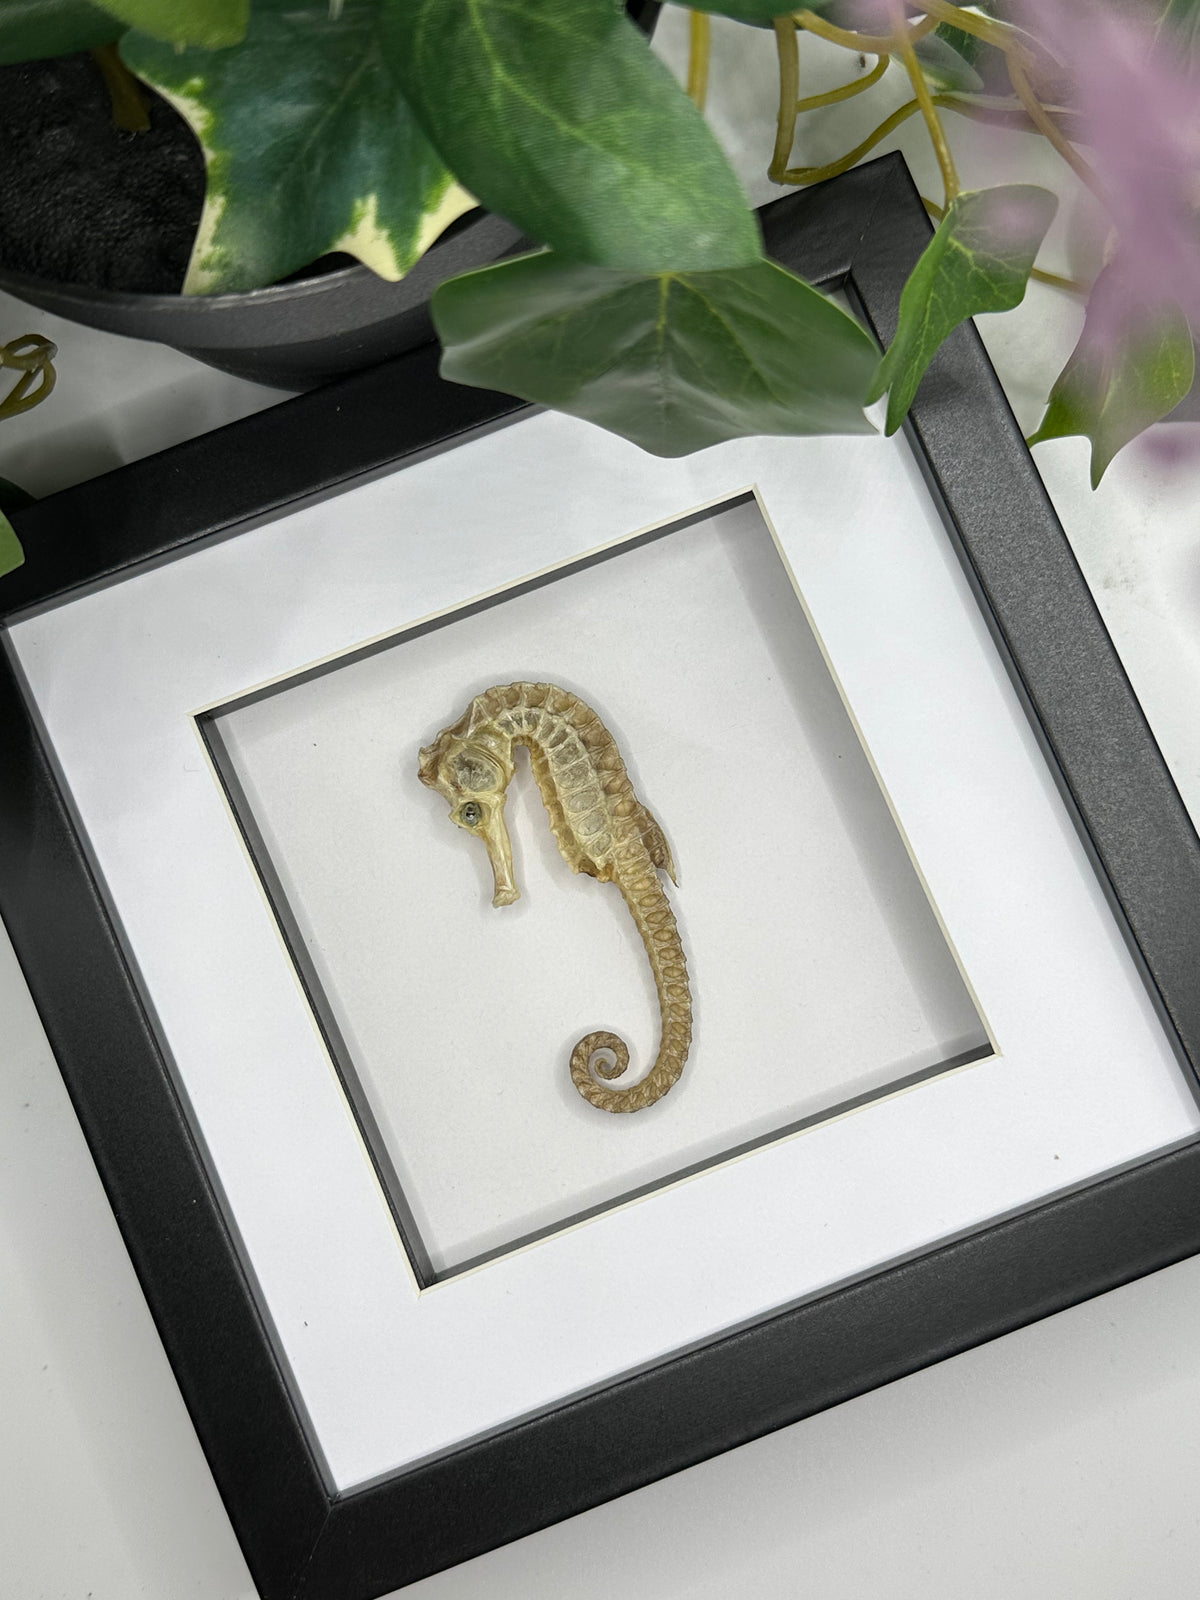 Dried Seahorse in a frame